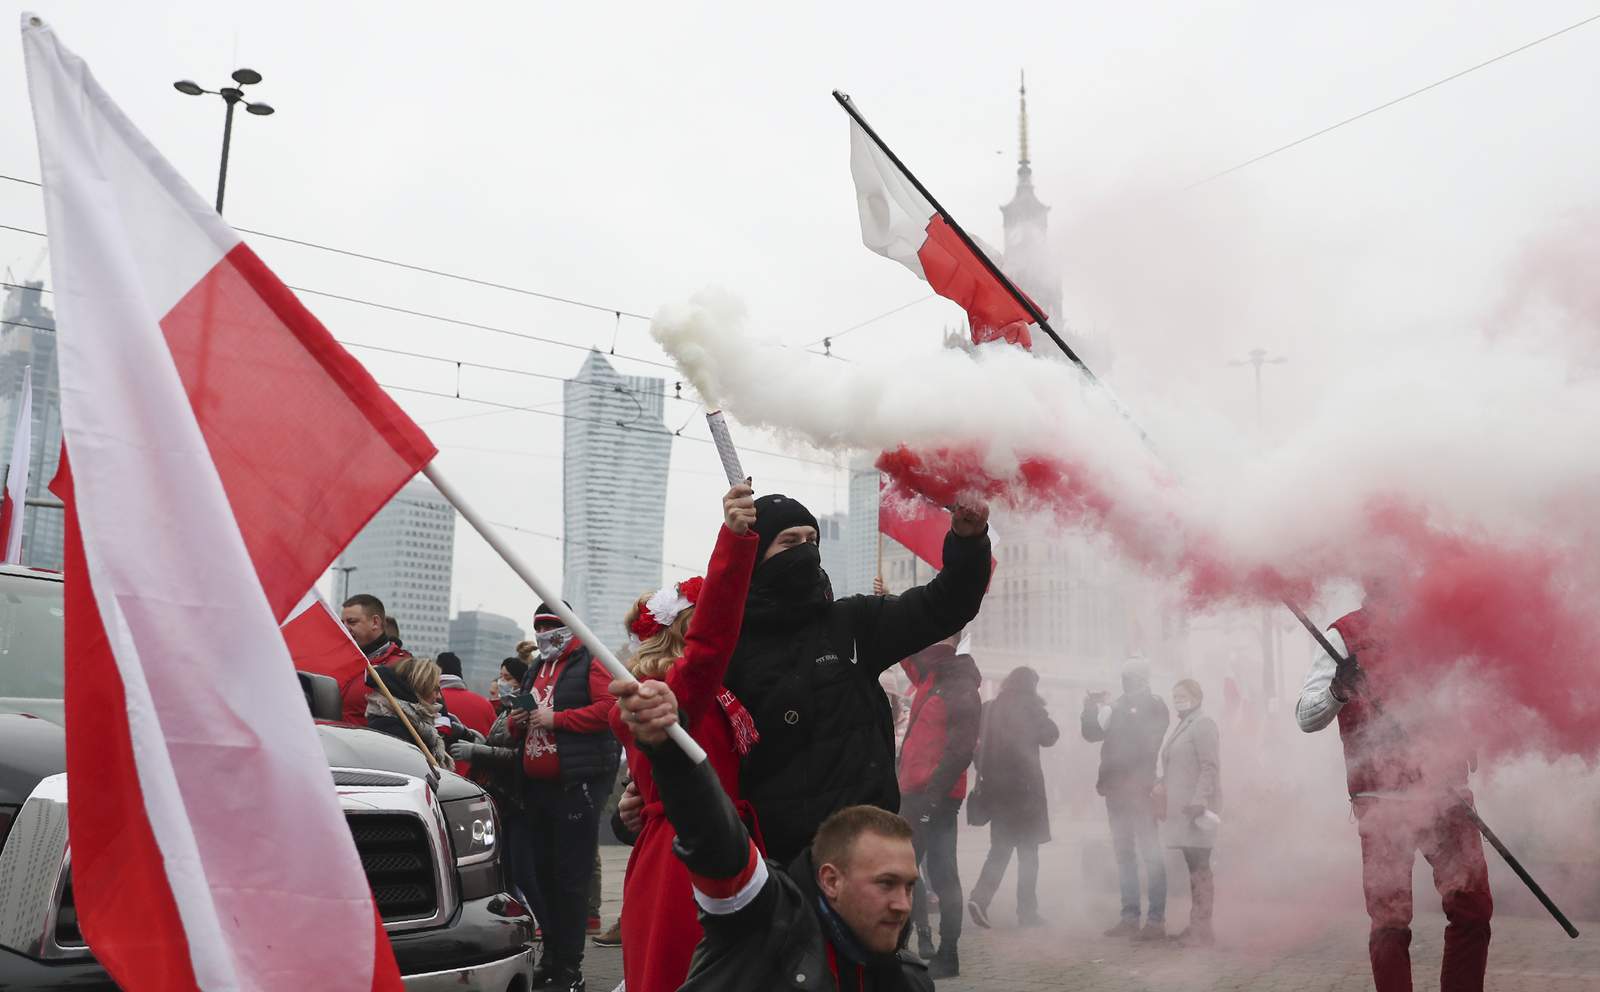 Poland blames violence at far-right march on hooligans